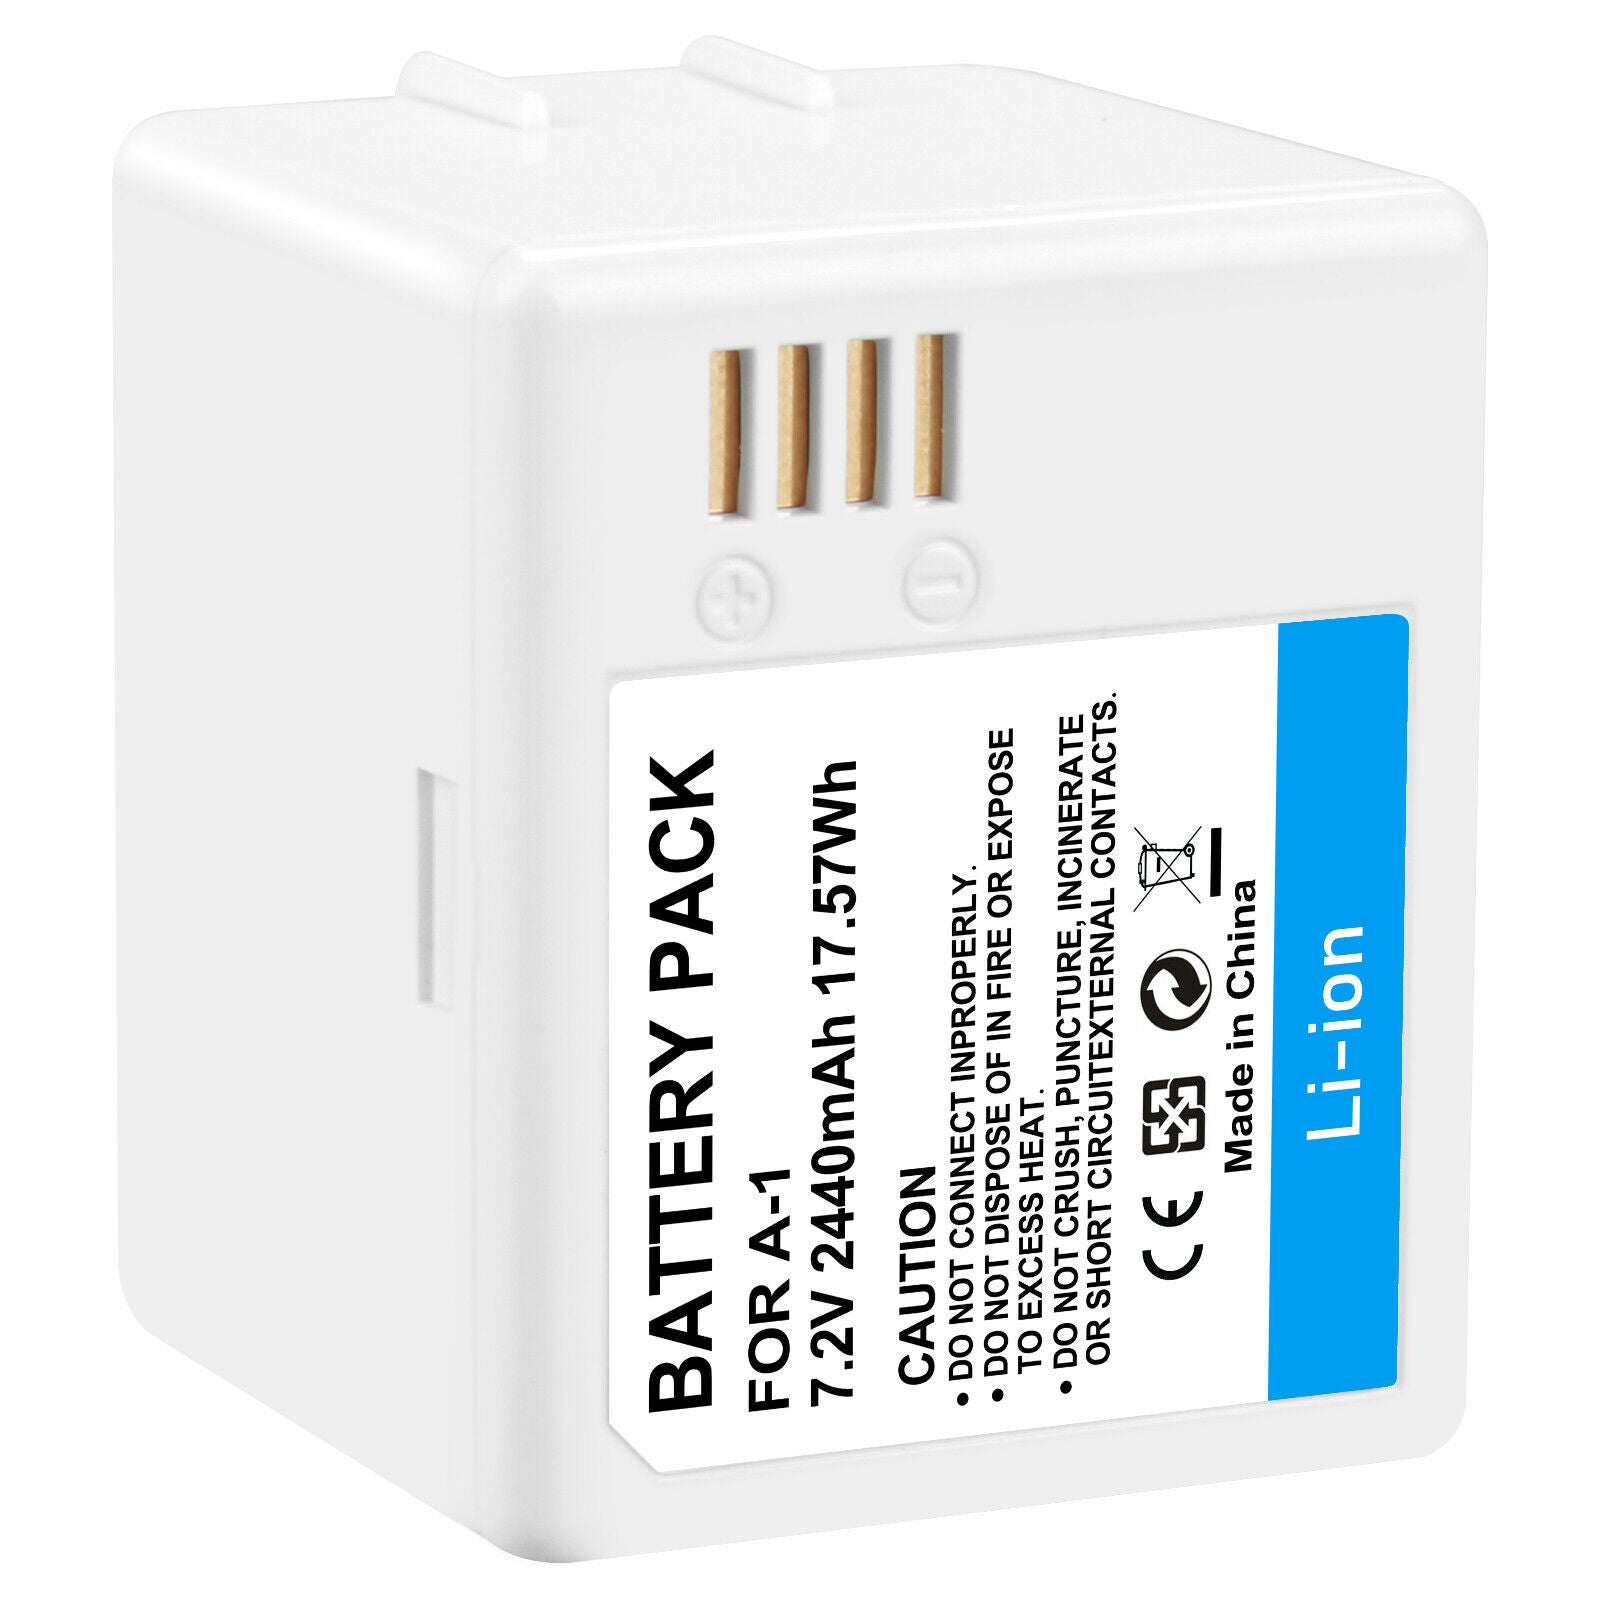 Replacement Battery for Arlo Pro Smart Security System Camera